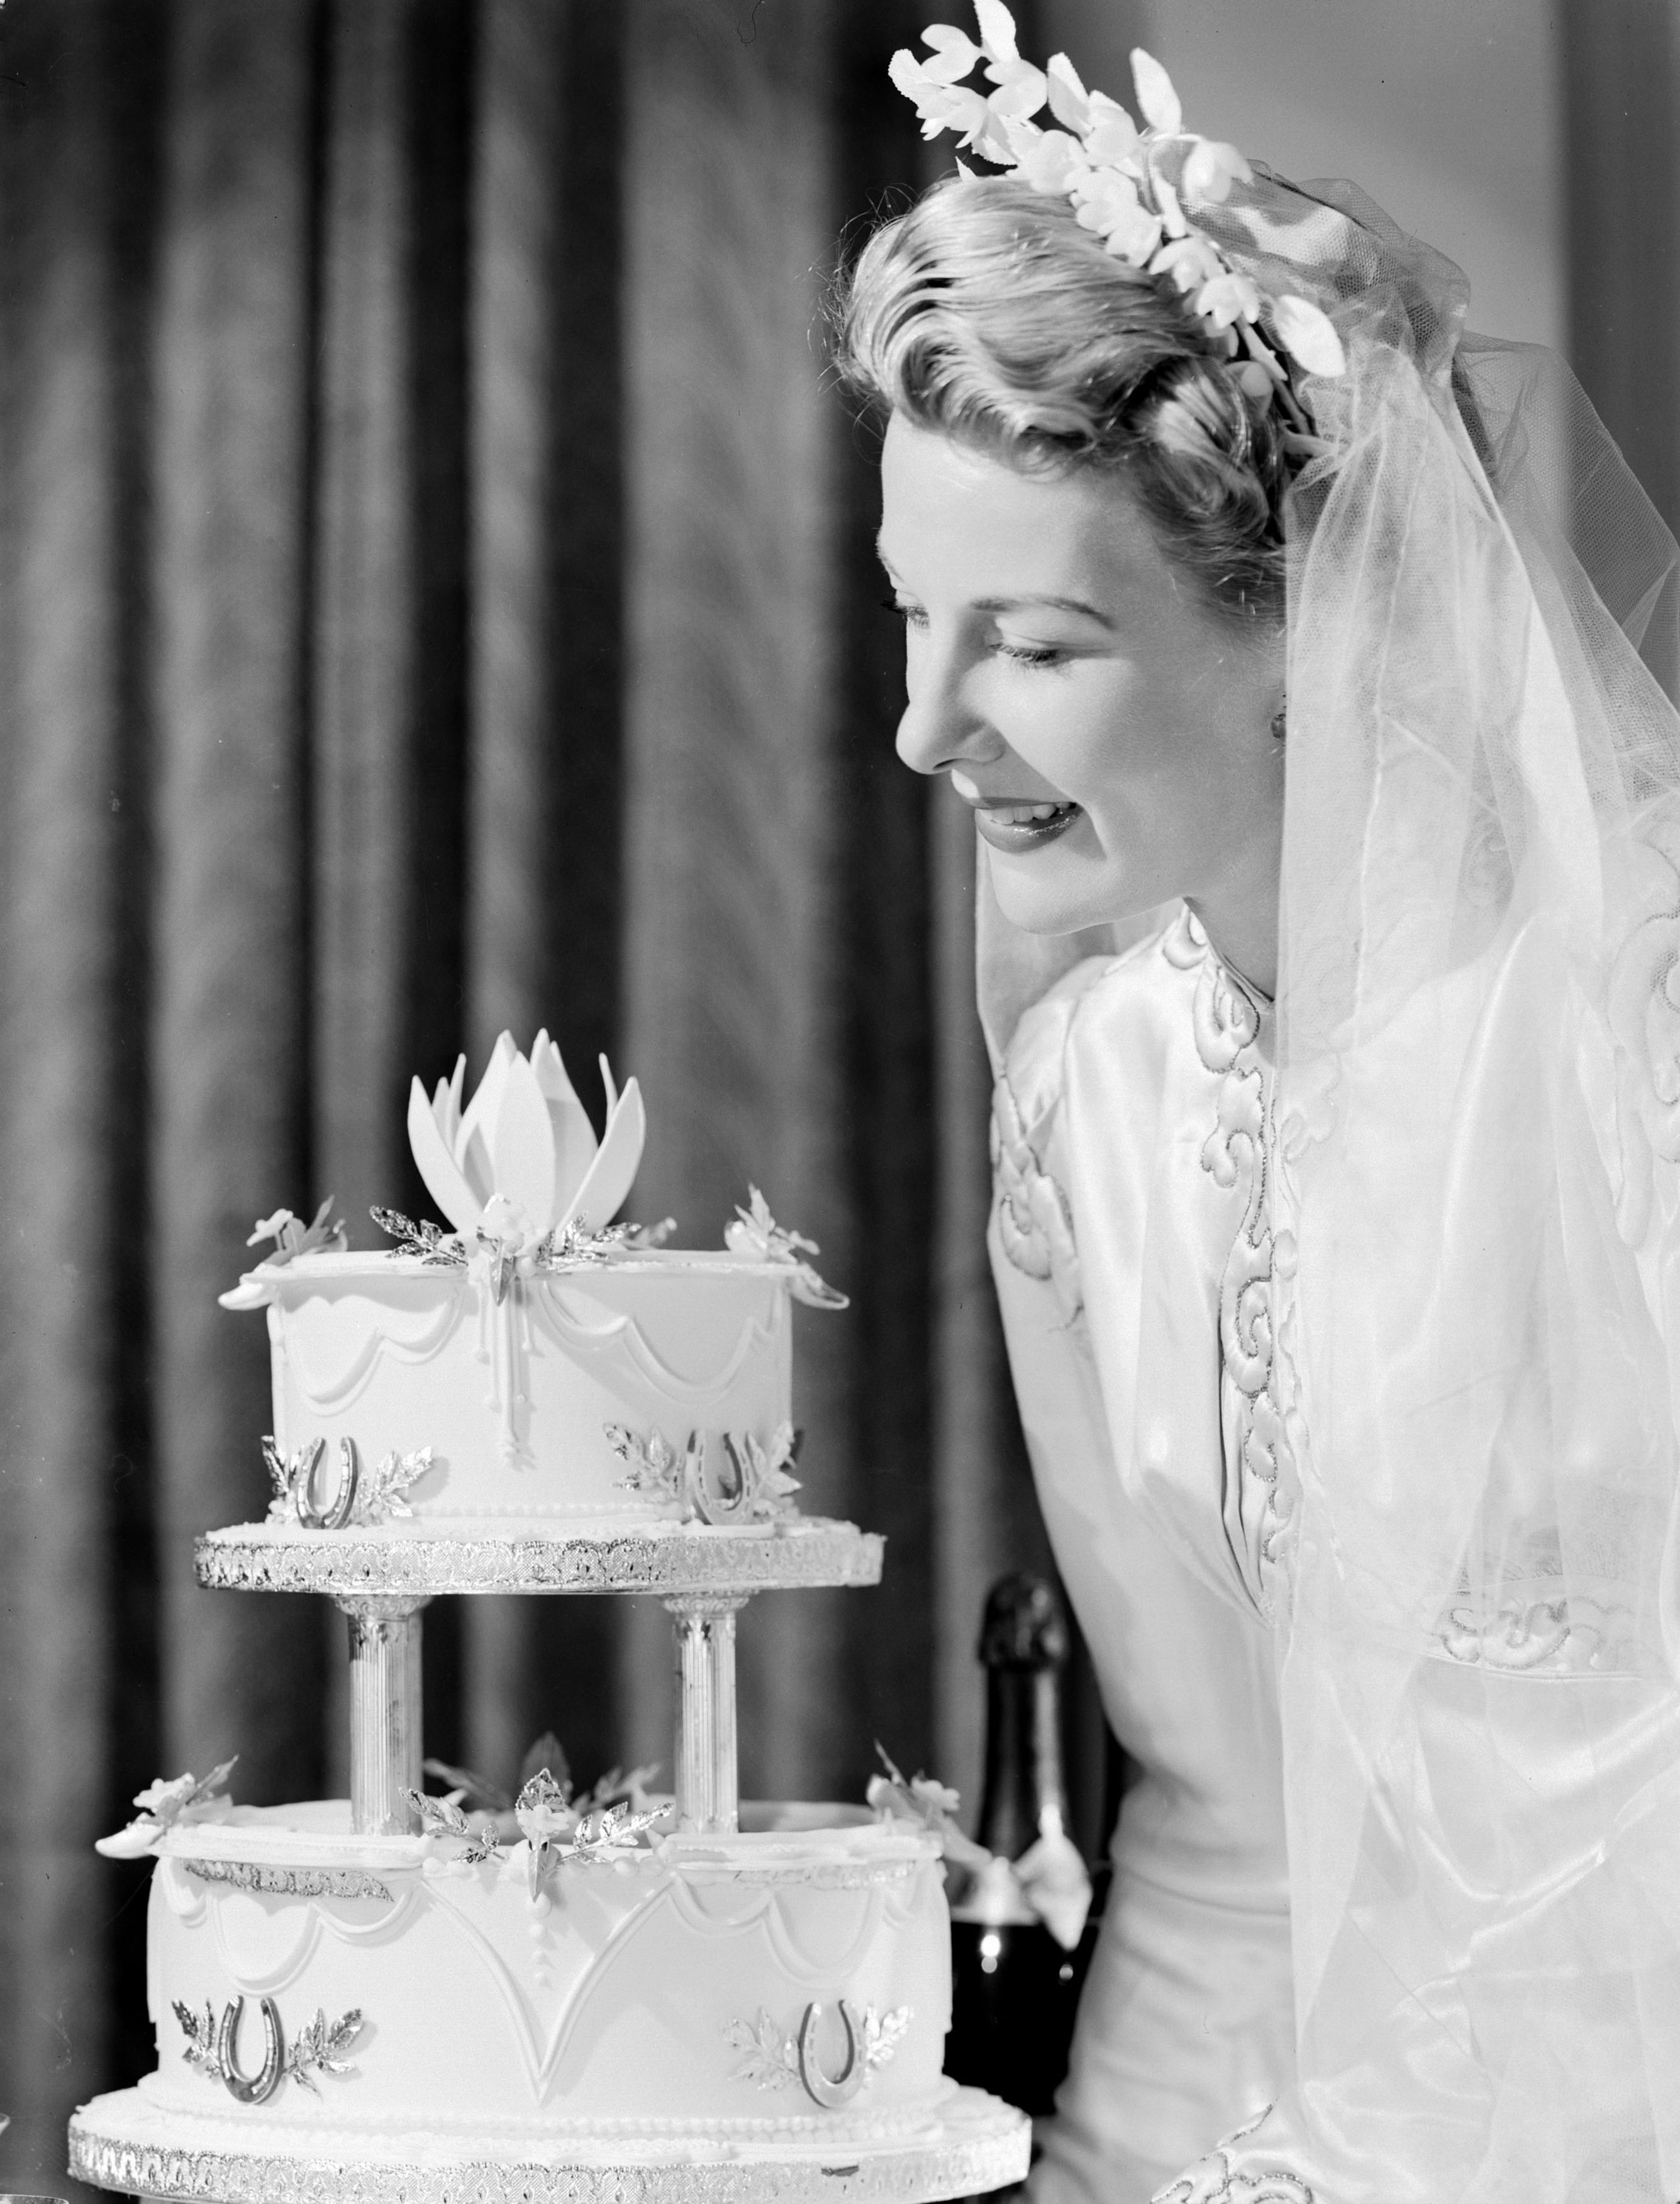 How Wedding Cakes Have Changed Over 100 Years - 100 Years of Wedding Cake Trends